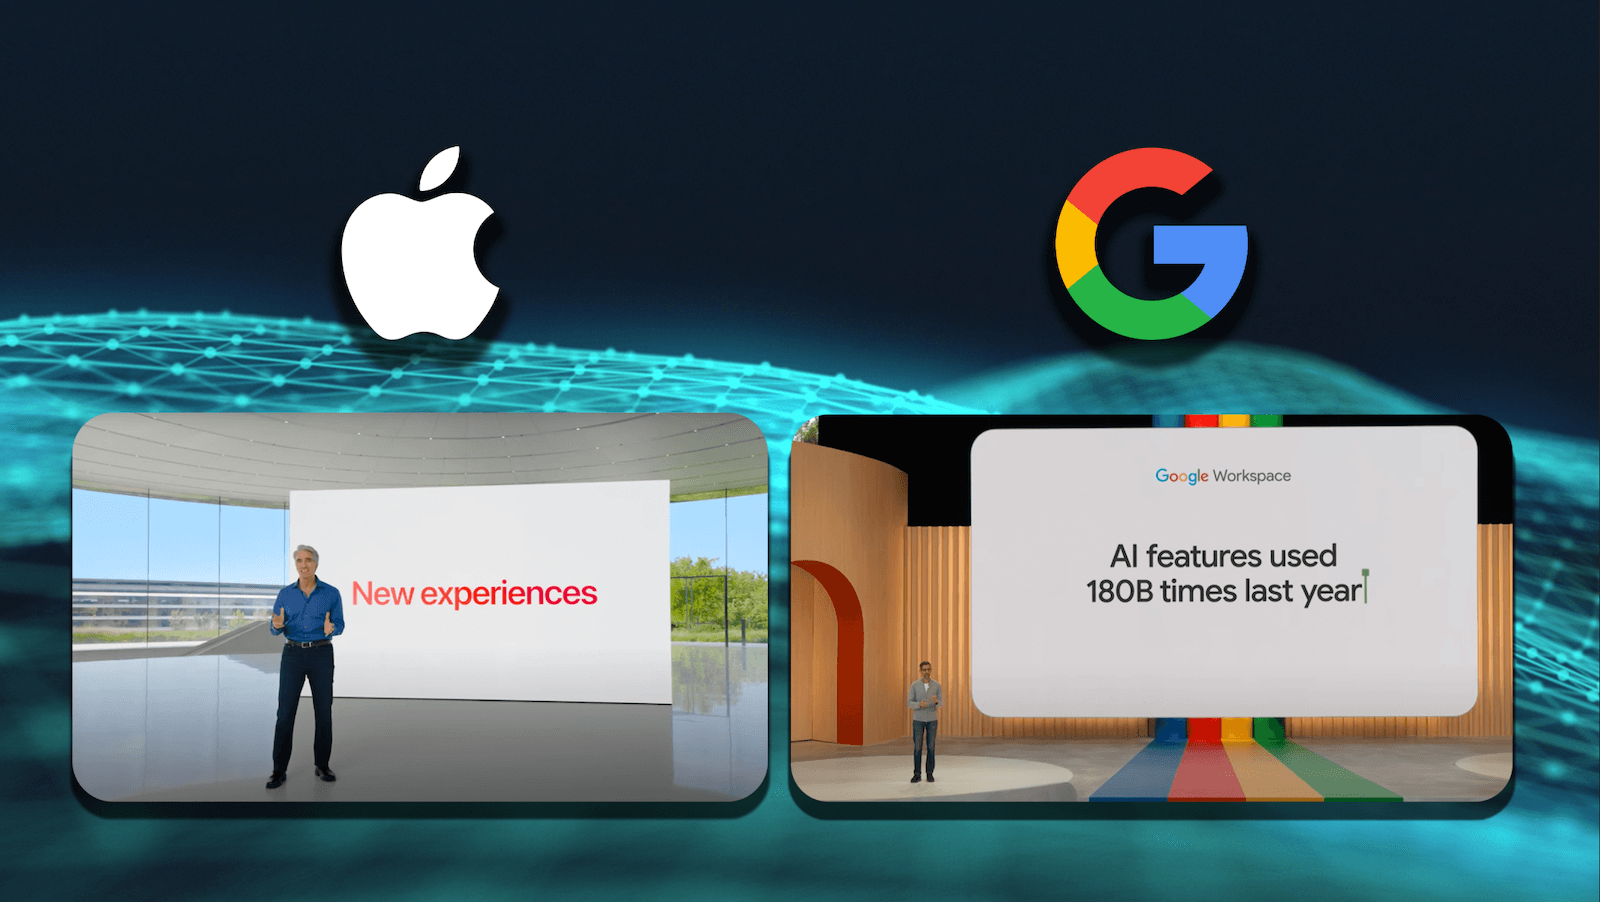 Apple and Google approach AI differently